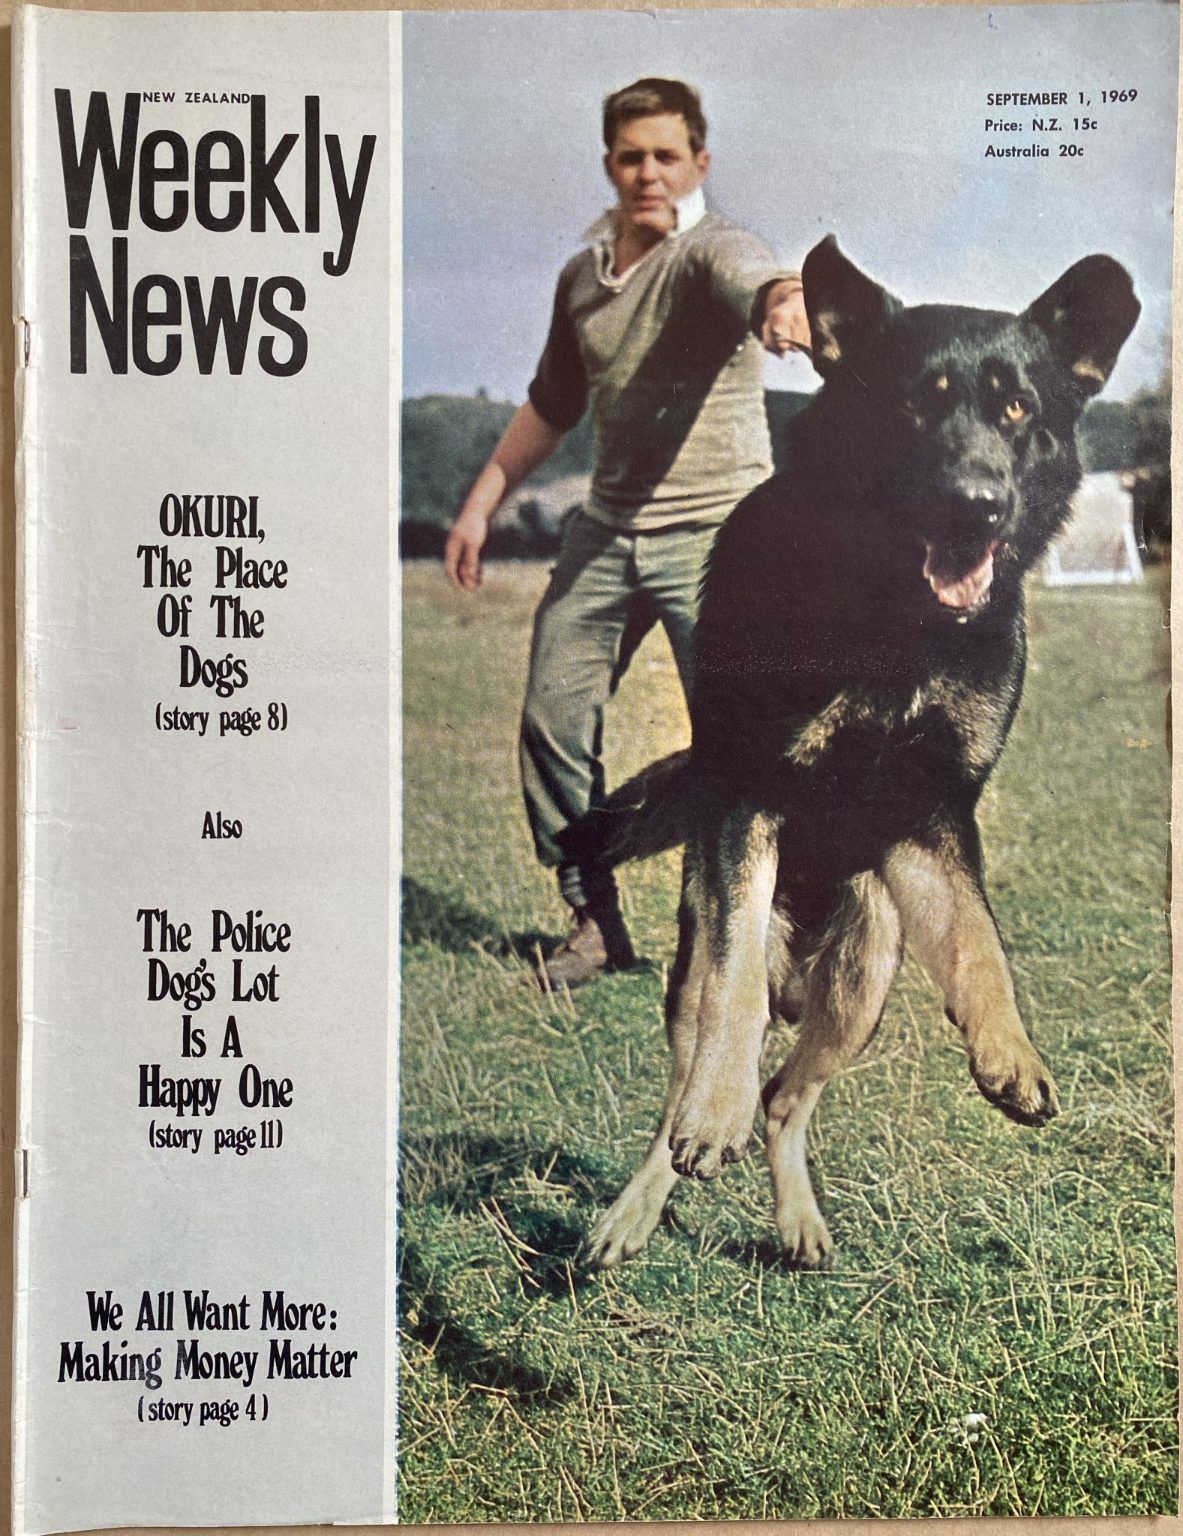 OLD NEWSPAPER: New Zealand Weekly News, No. 5518, 1 September 1969